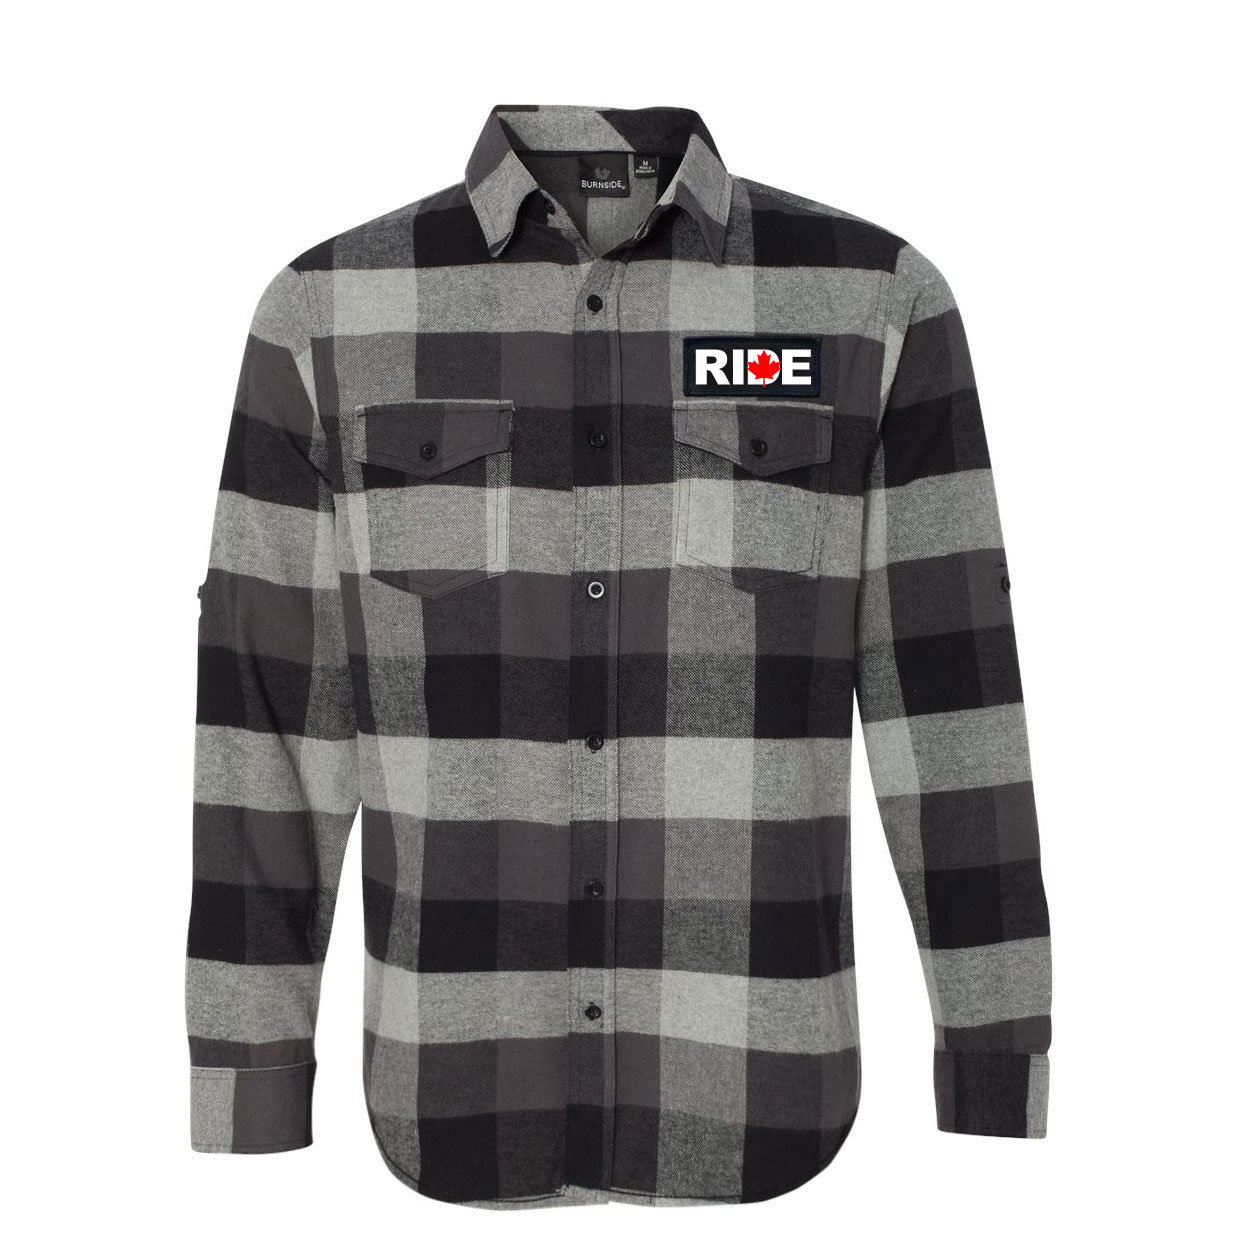 Ride Canada Classic Unisex Long Sleeve Woven Patch Flannel Shirt Black/Gray (White Logo)